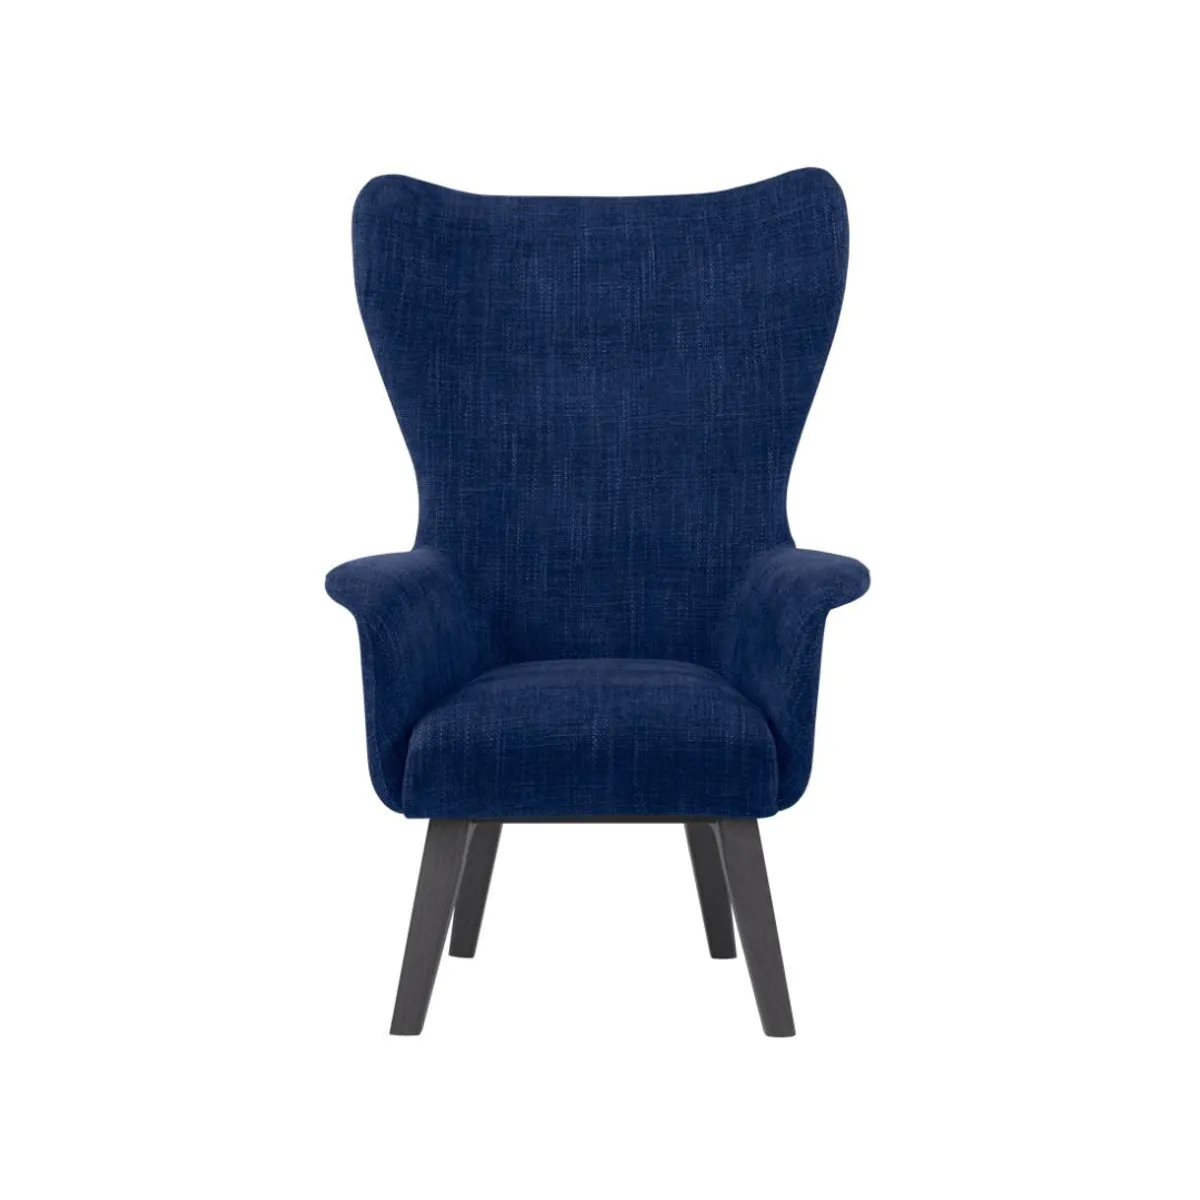 Avery wing back chair 2